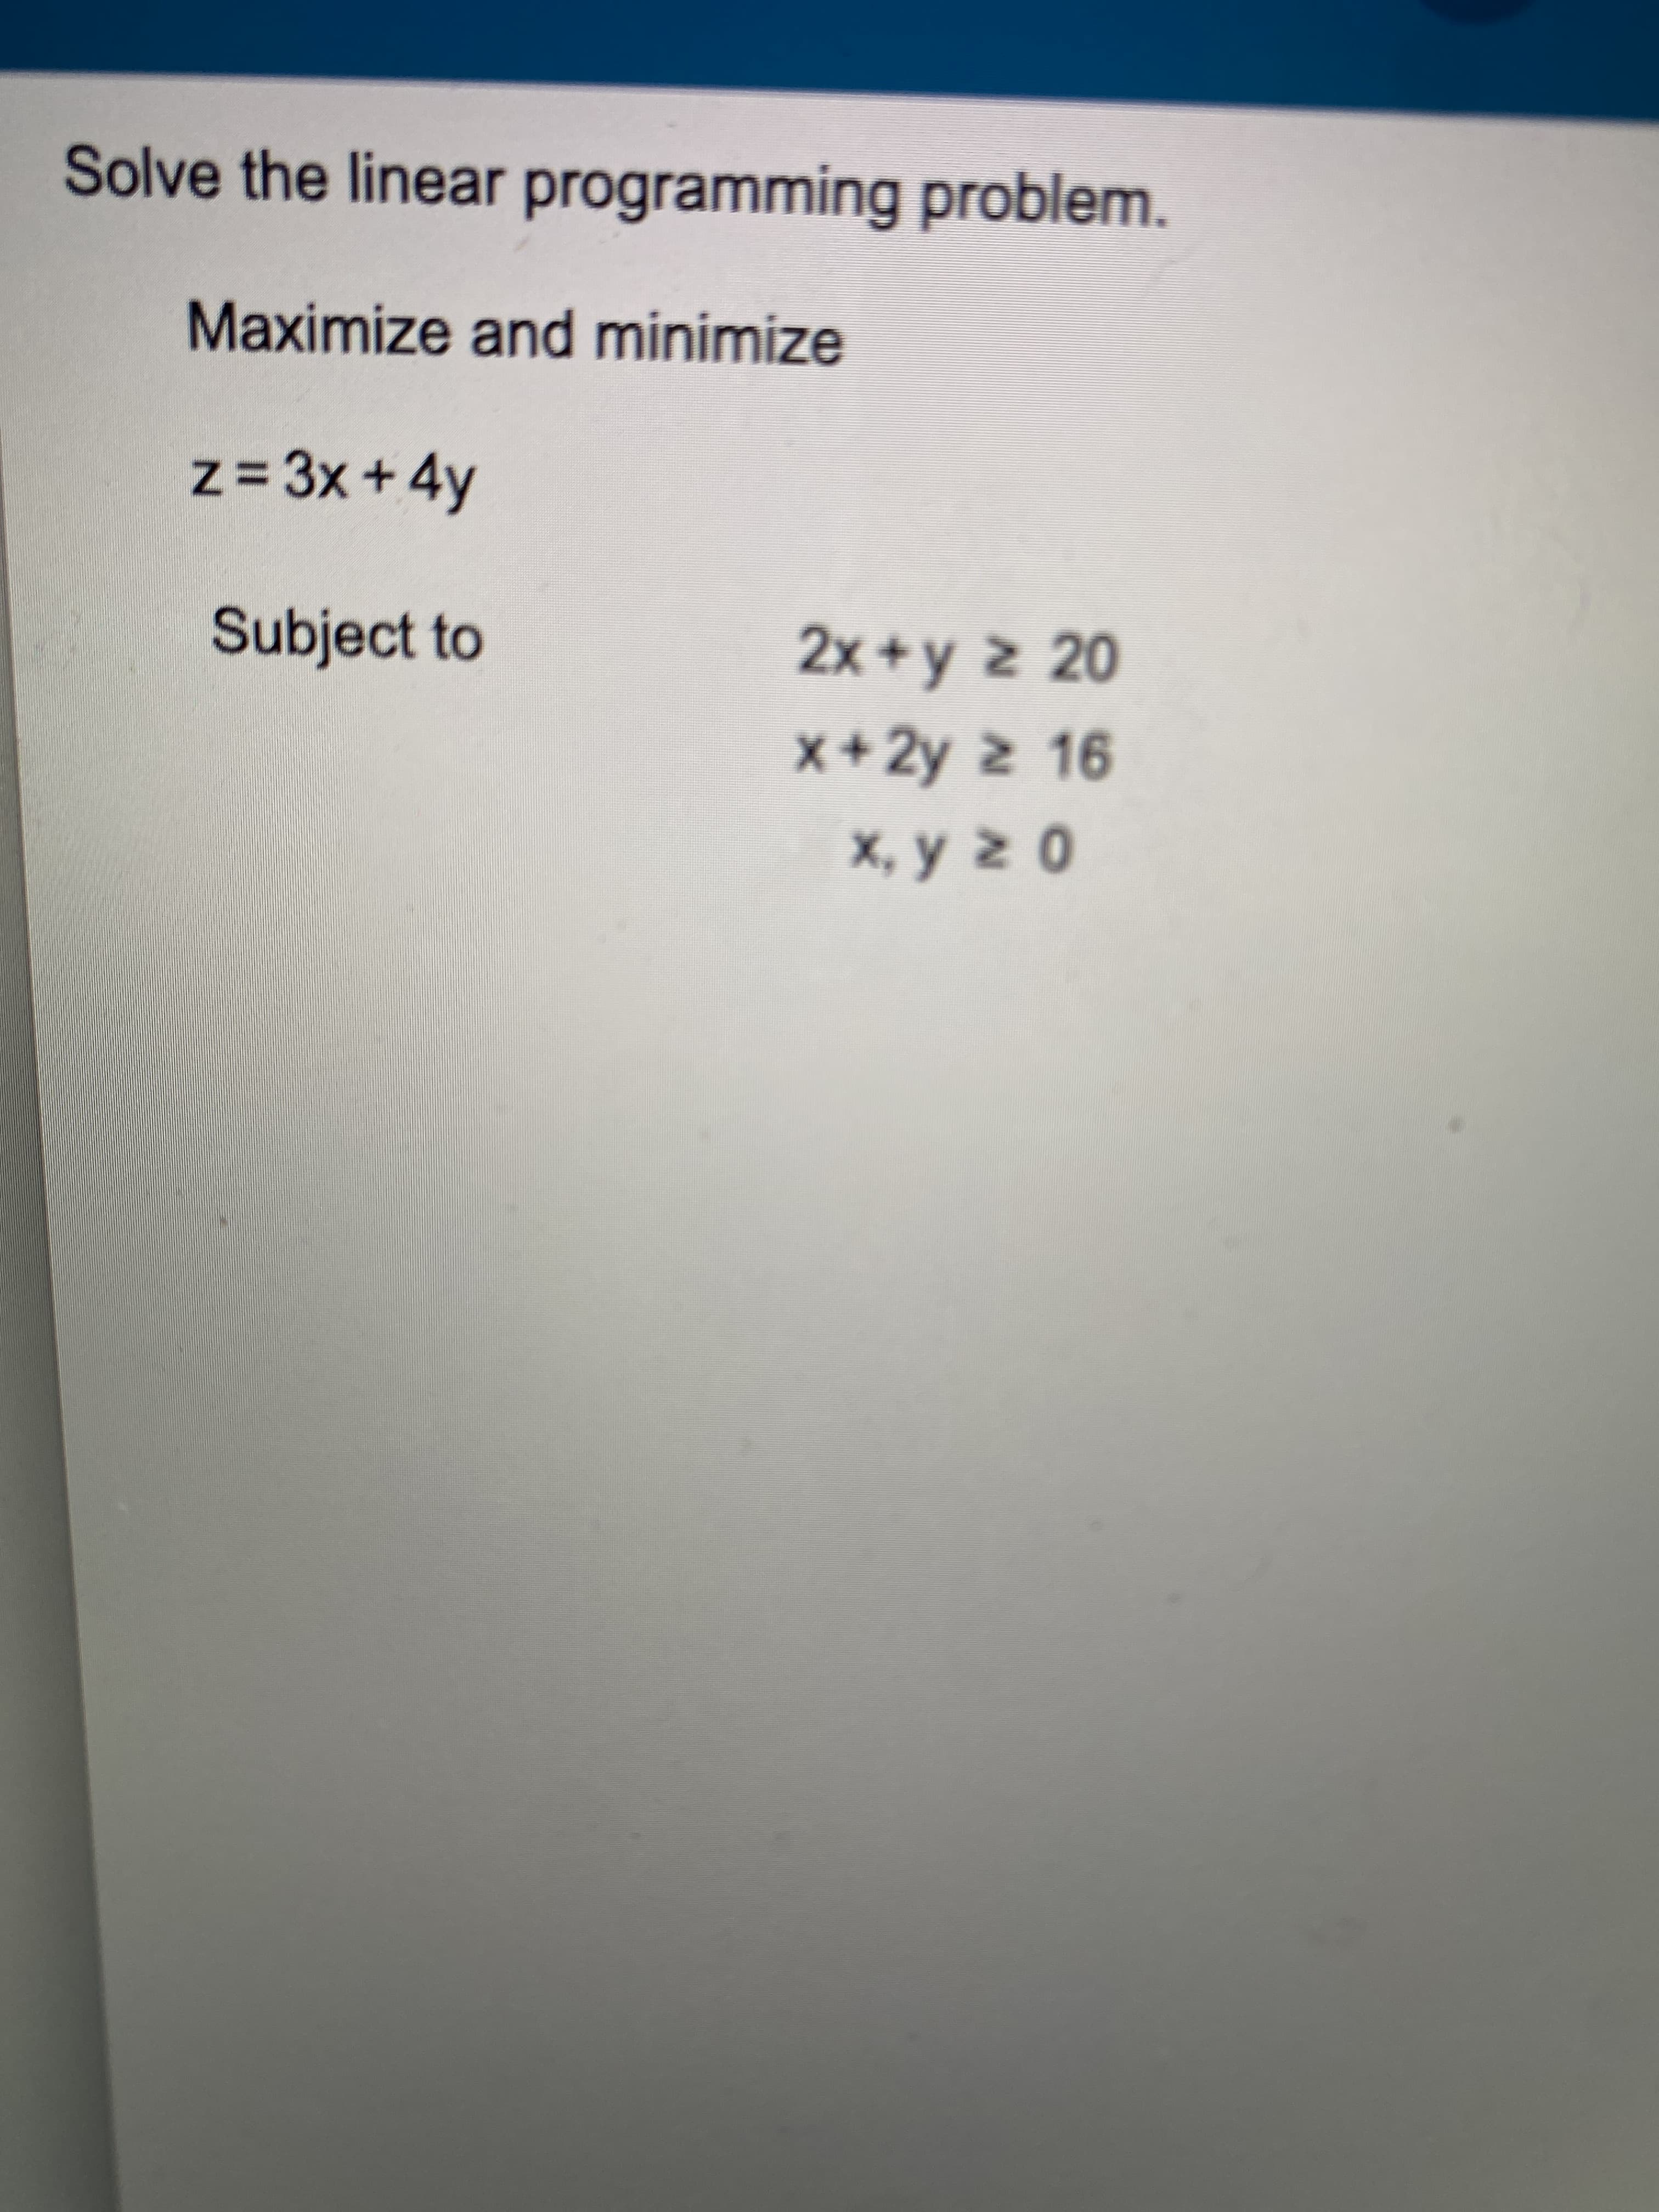 Solve the linear programming problem.
Maximize and minimize
z= 3x+ 4y
Subject to
2x+y z 20
x+2y 2 16
